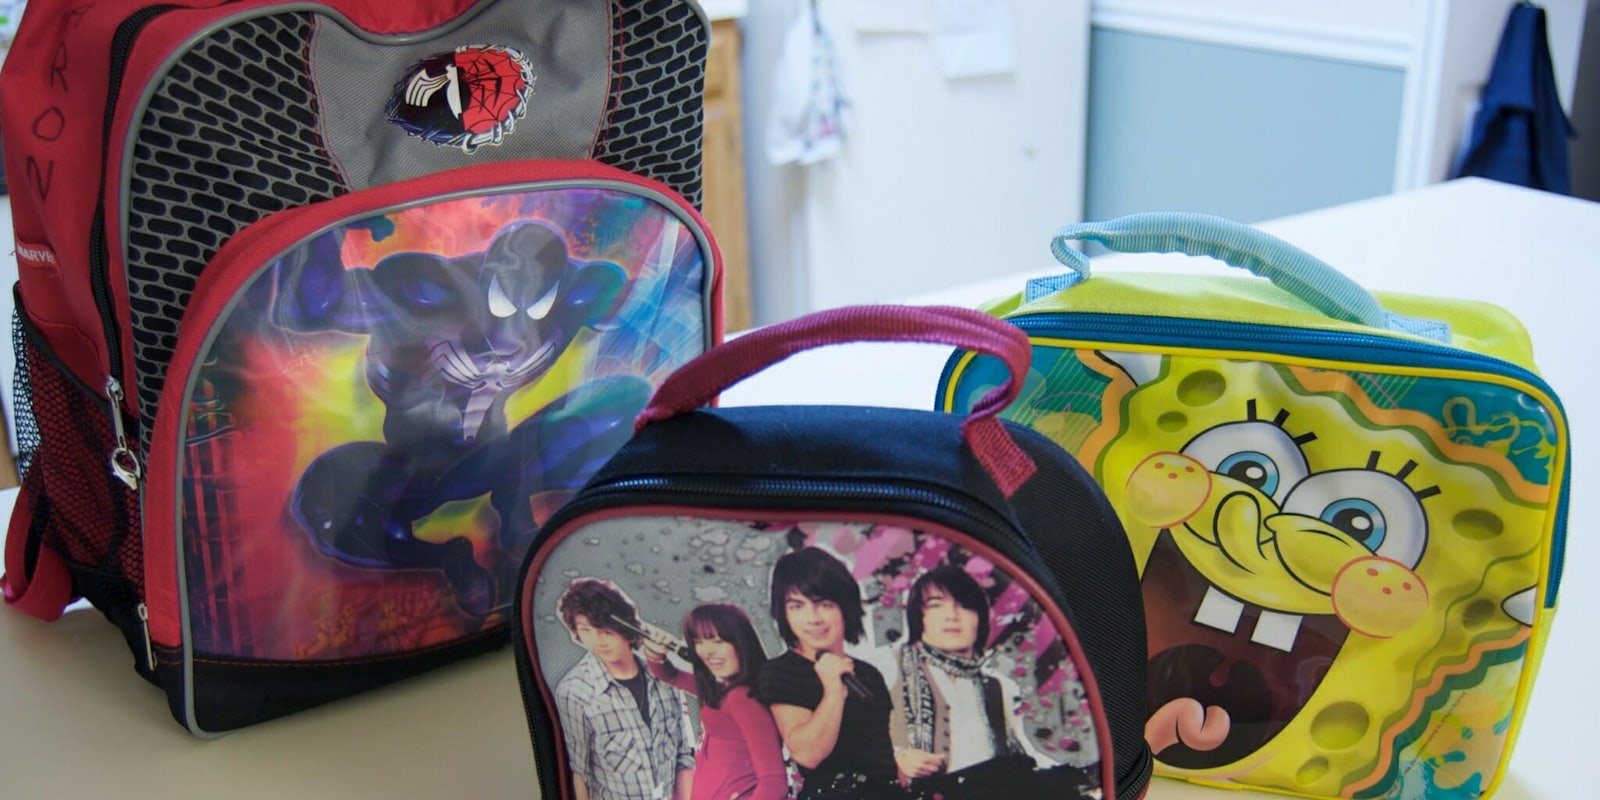 Children's backpacks and lunchboxes